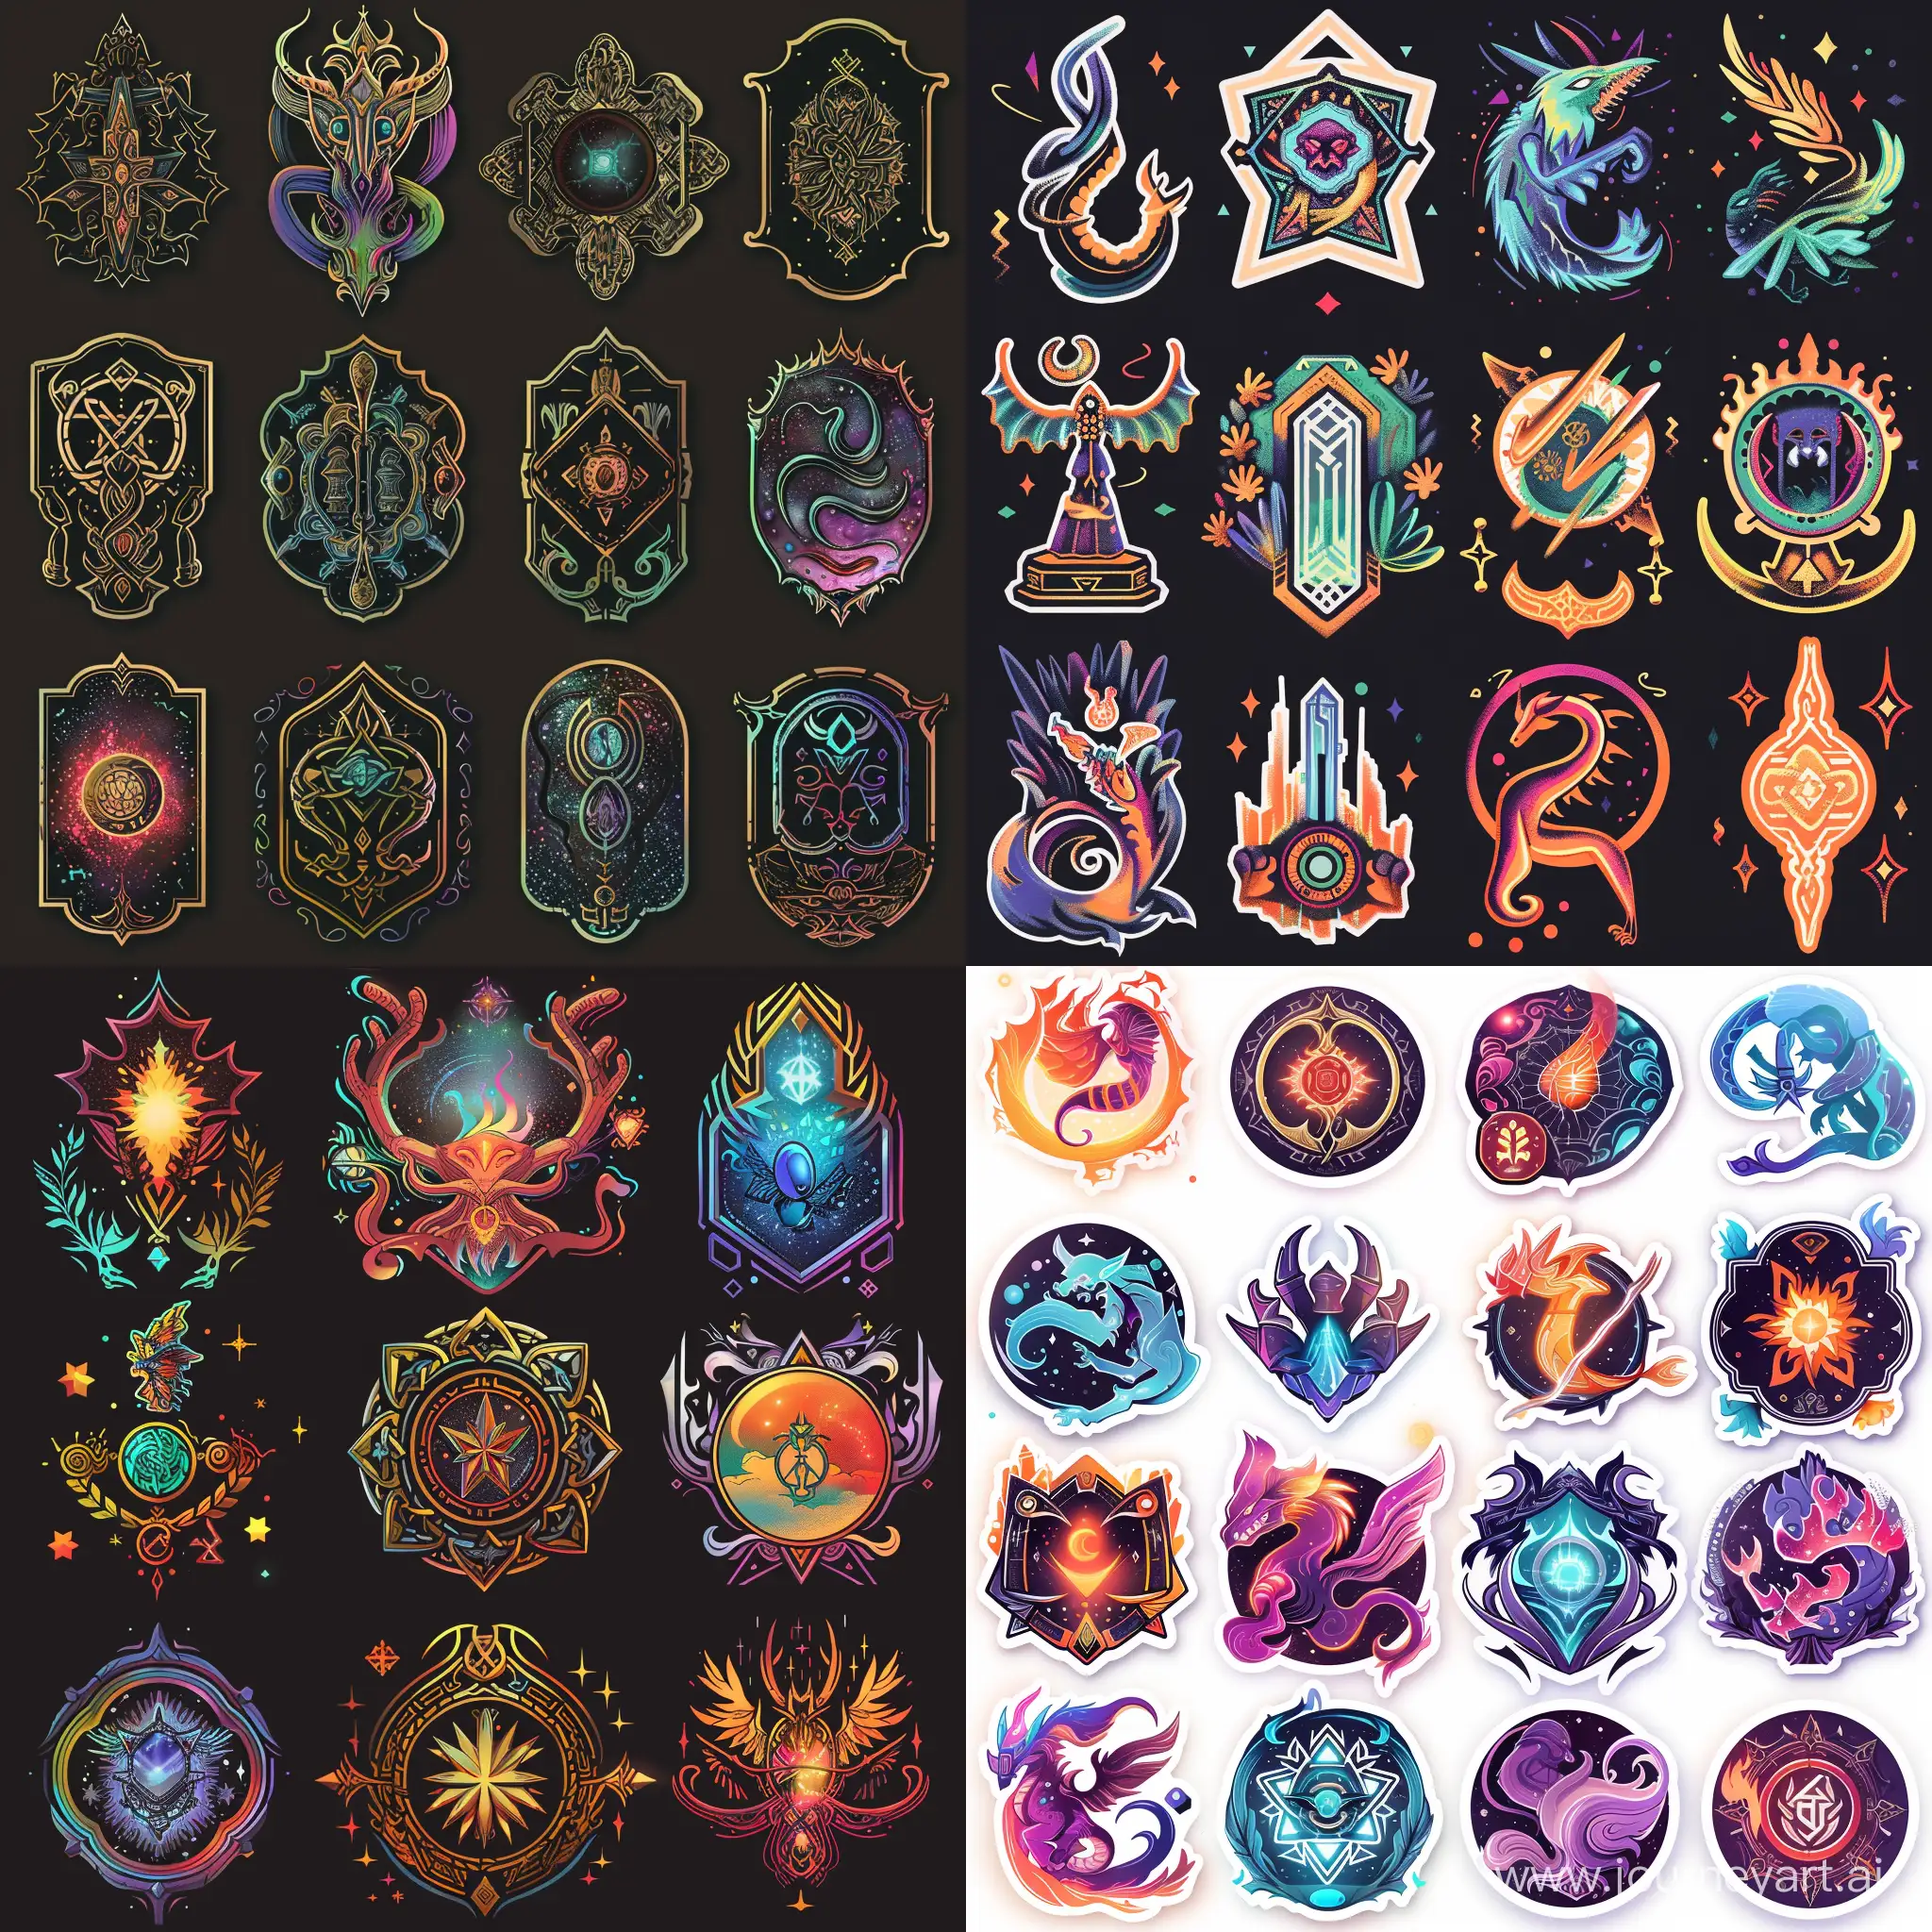 Design a set of fantasy abstract stickers for printing. inspired by mythical creatures, arcane symbols, and enchanted artifacts, perfect for enhancing game art with mystical charm and intrigue. Create imagery that evokes ancient runes, shimmering portals, celestial beings, and mystical elements intertwined with vibrant colors and intricate patterns. Your stickers should transport players to a realm of magic and wonder, sparking their imagination and enriching their gaming experience."